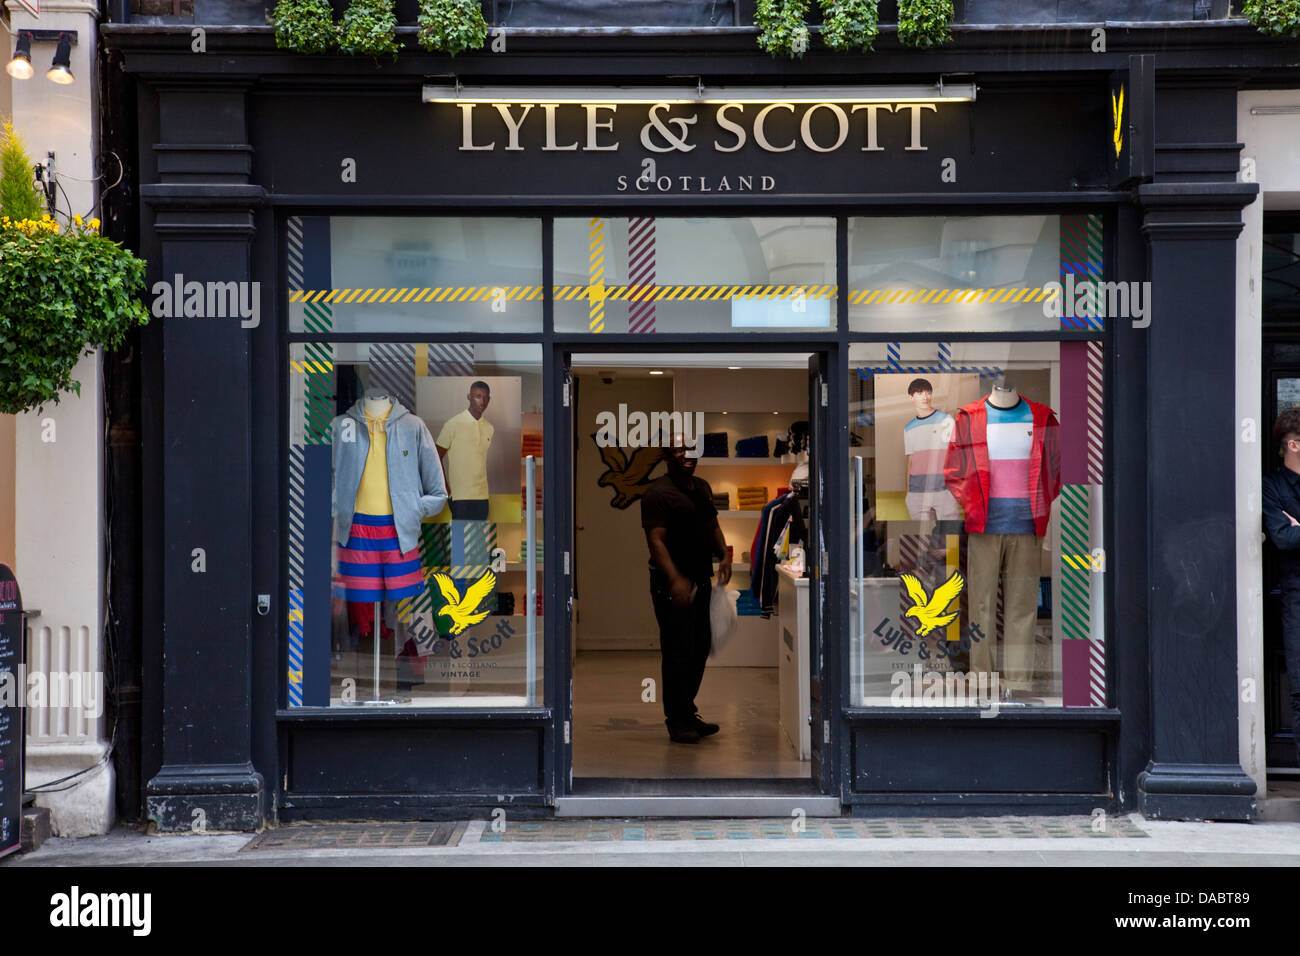 Lyle And Scott Store High Resolution Stock Photography and Images - Alamy